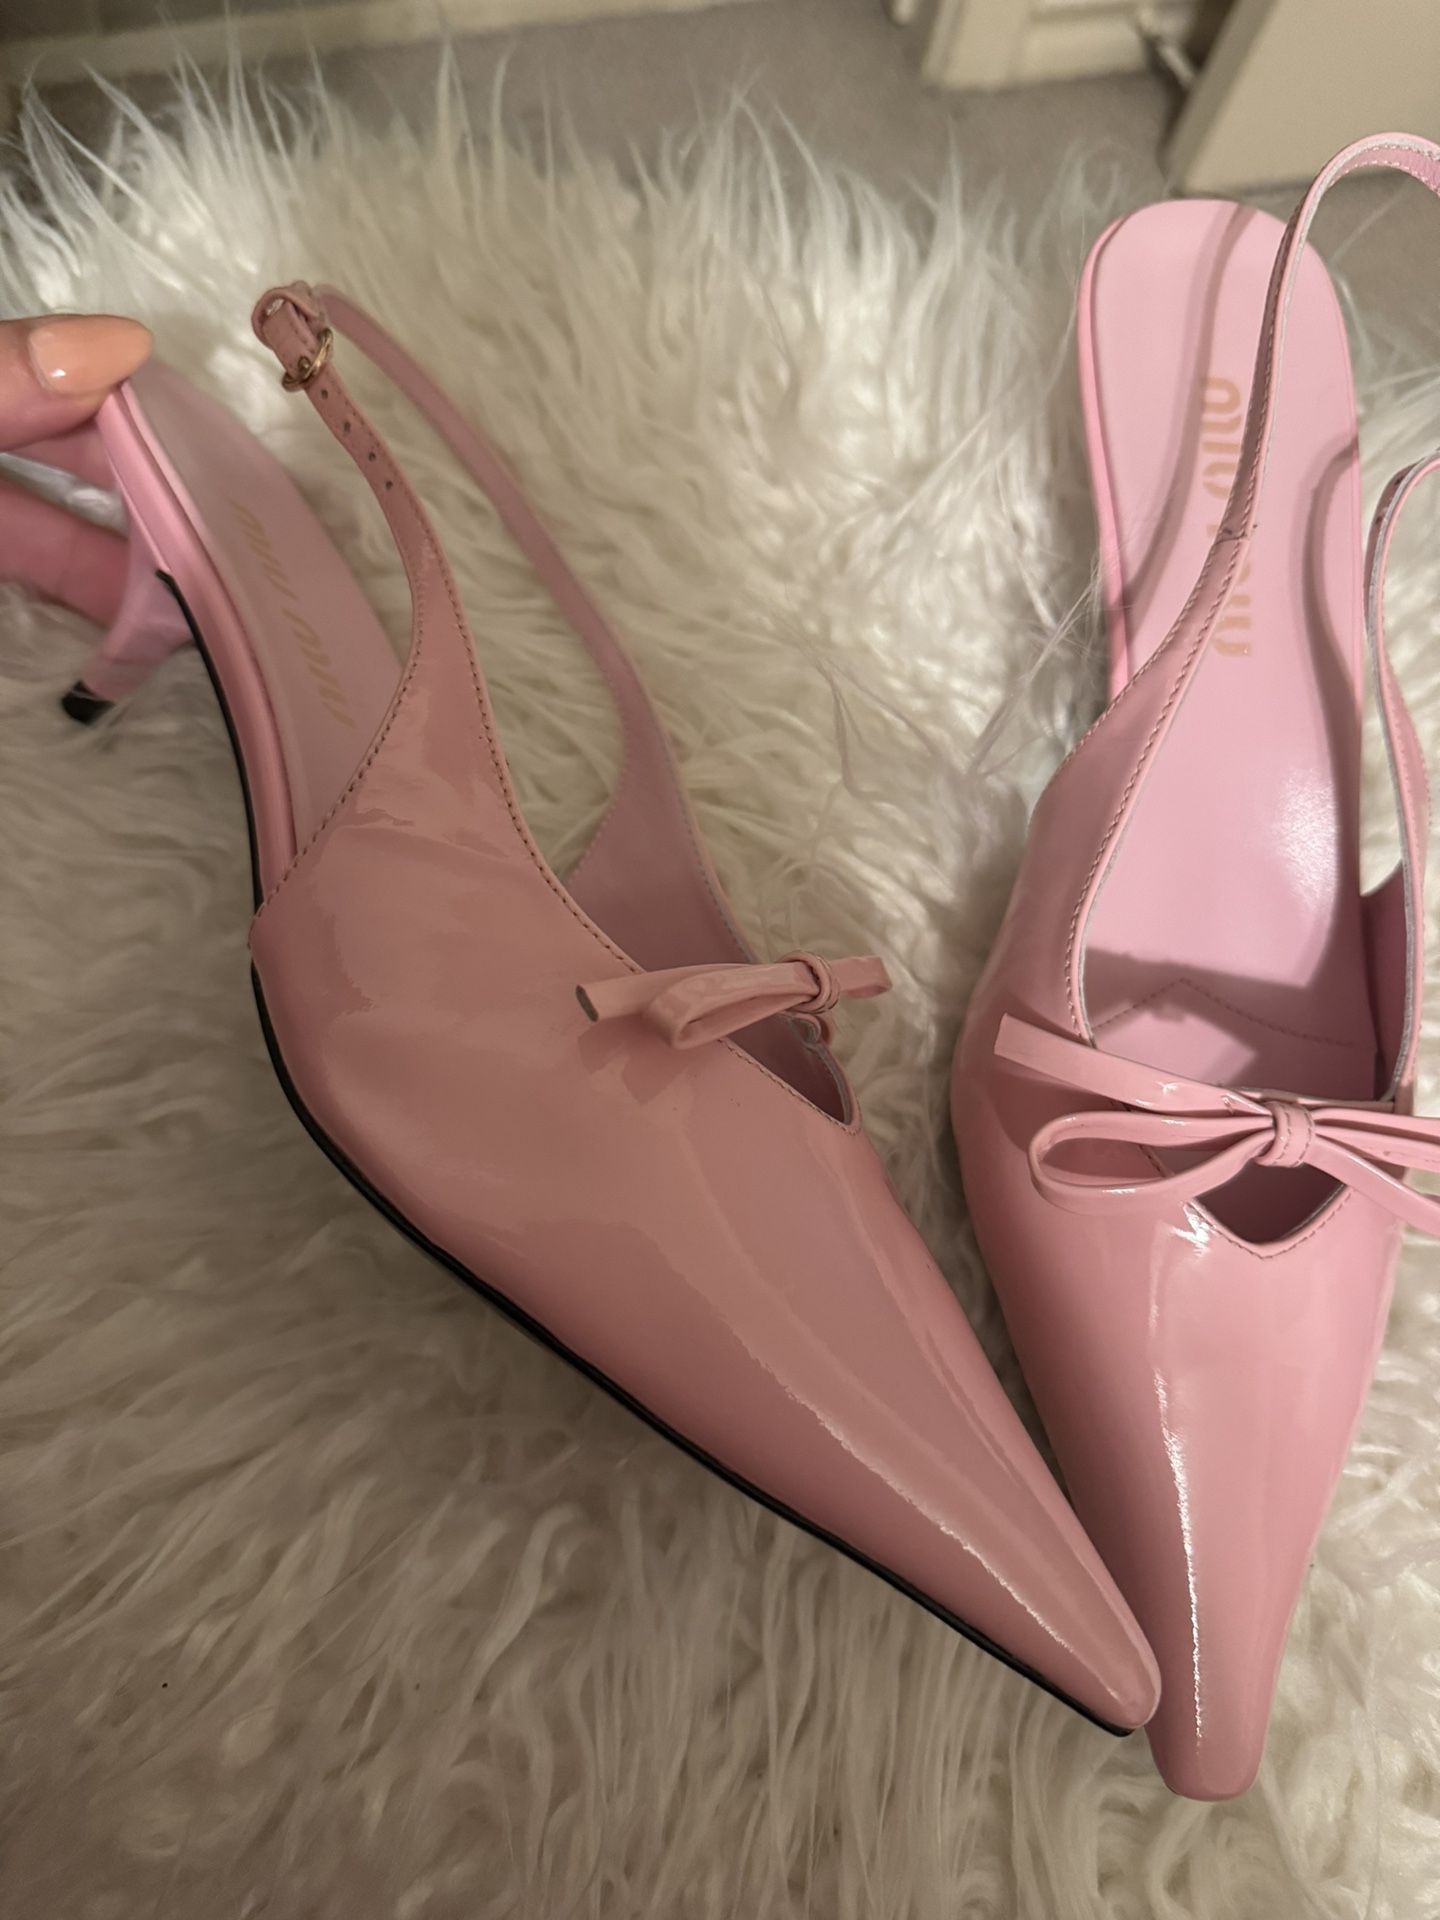 Top quality Brand New Pink cute Heels